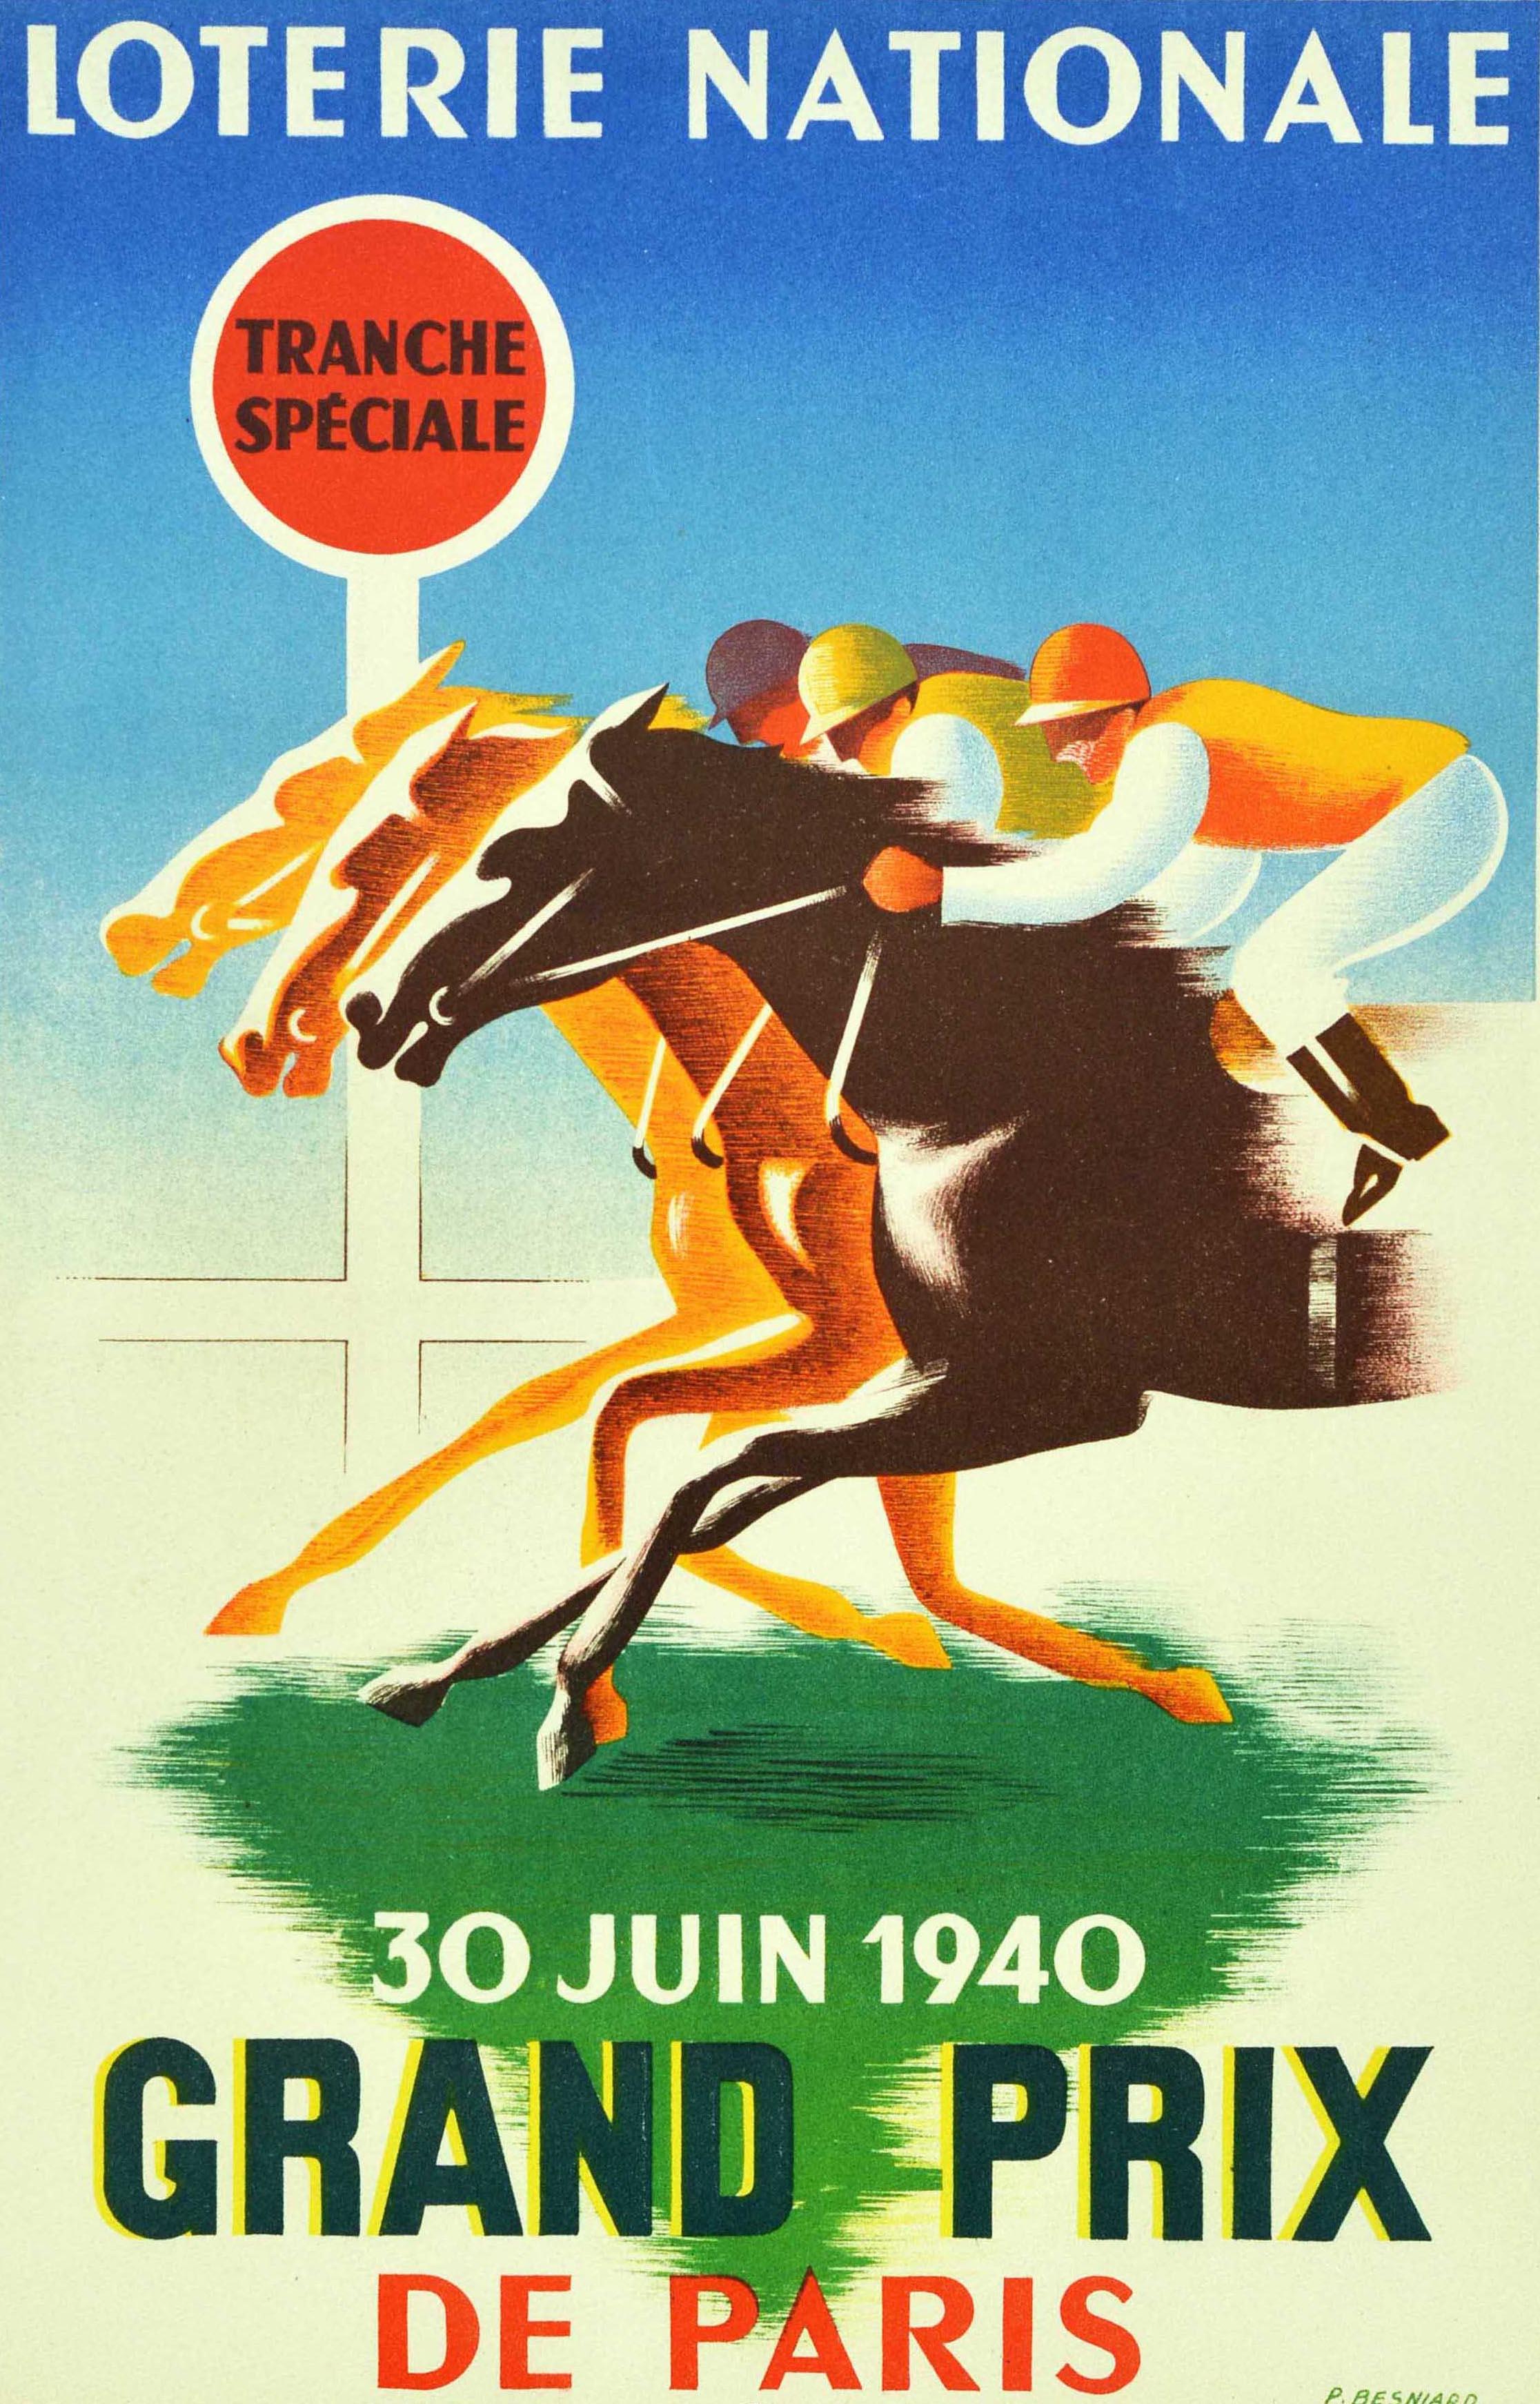 Original vintage advertising poster for the Loterie Nationale Tranche Speciale Grand Prix De Paris French national lottery on 30 June 1940 featuring a horse race design depicting three jockeys racing their horses at the finish post. Printed by